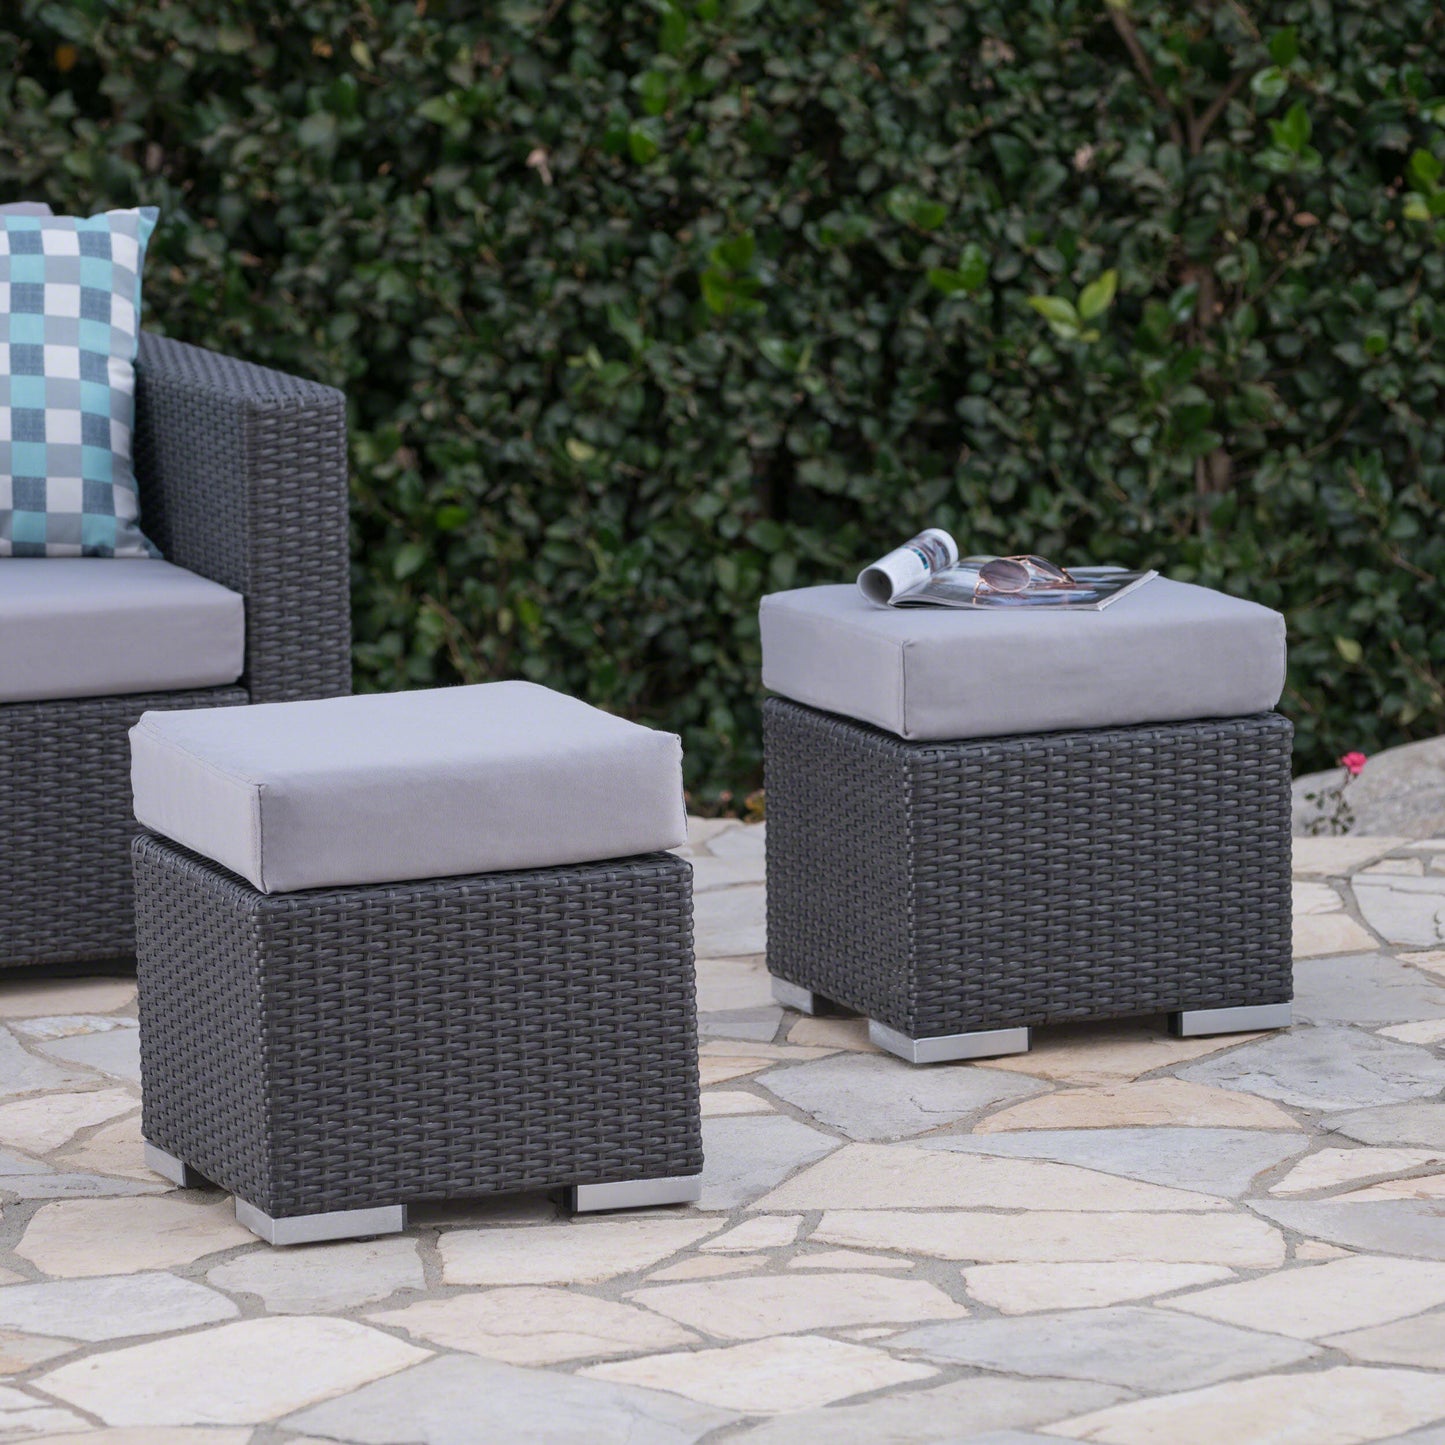 Santa Rosa Outdoor 16 Inch Wicker Ottoman Seat with Water Resistant Cushion